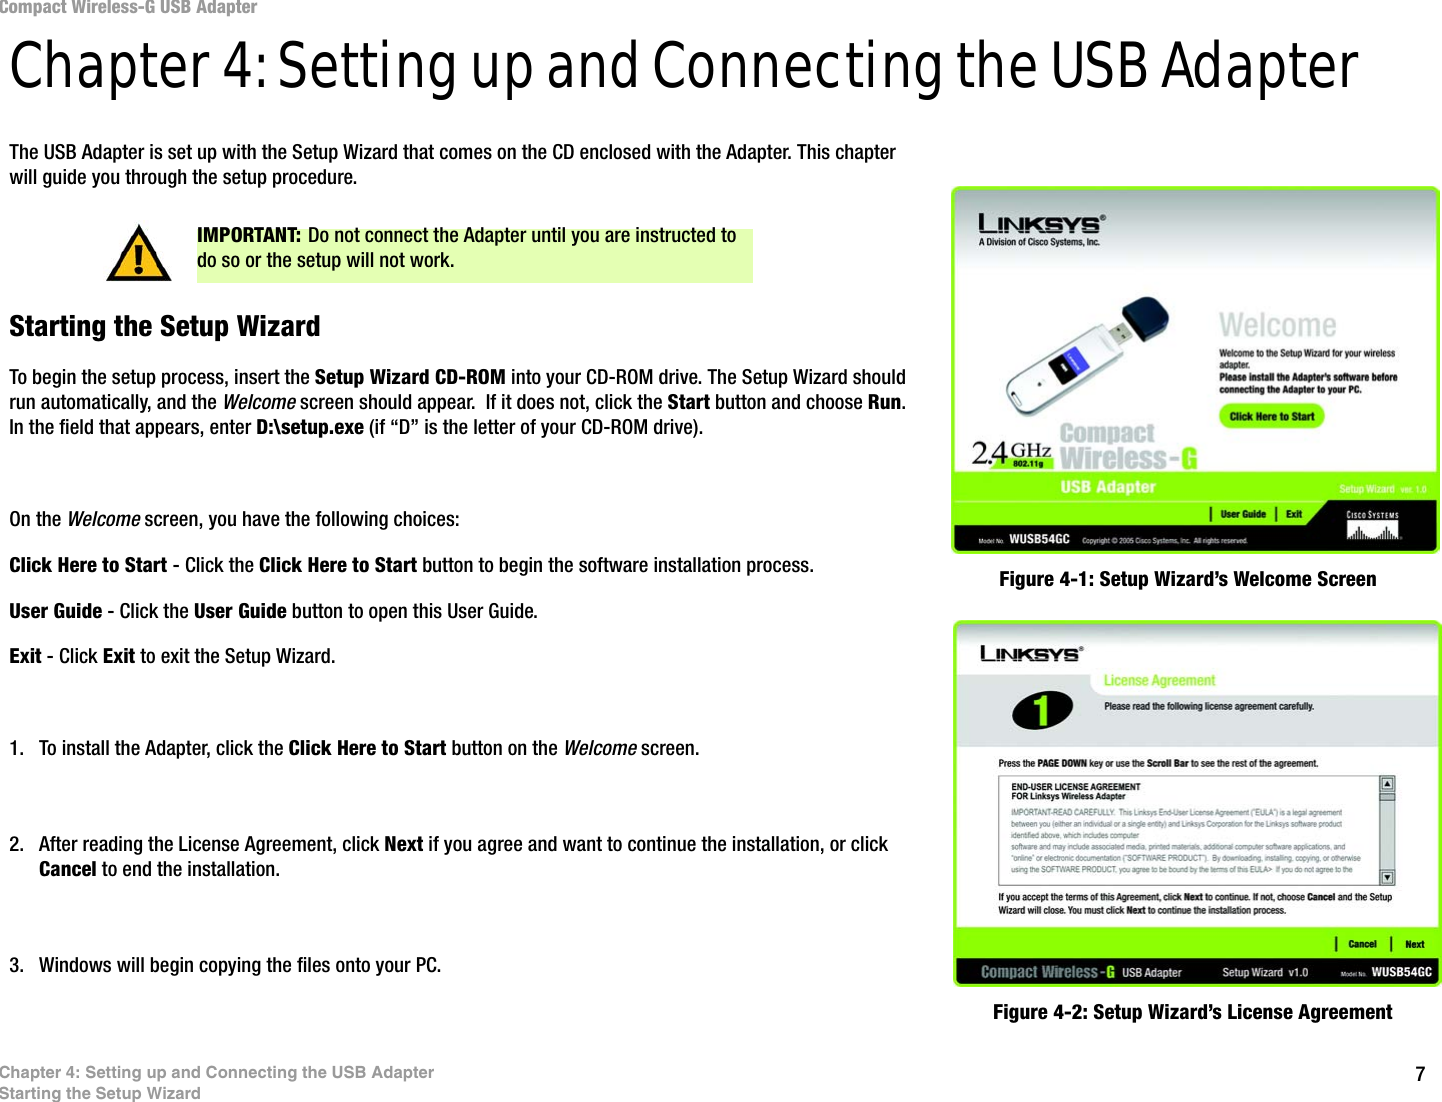 7Chapter 4: Setting up and Connecting the USB AdapterStarting the Setup WizardCompact Wireless-G USB AdapterChapter 4: Setting up and Connecting the USB AdapterThe USB Adapter is set up with the Setup Wizard that comes on the CD enclosed with the Adapter. This chapter will guide you through the setup procedure. Starting the Setup WizardTo begin the setup process, insert the Setup Wizard CD-ROM into your CD-ROM drive. The Setup Wizard should run automatically, and the Welcome screen should appear.  If it does not, click the Start button and choose Run. In the field that appears, enter D:\setup.exe (if “D” is the letter of your CD-ROM drive). On the Welcome screen, you have the following choices:Click Here to Start - Click the Click Here to Start button to begin the software installation process. User Guide - Click the User Guide button to open this User Guide. Exit - Click Exit to exit the Setup Wizard.1. To install the Adapter, click the Click Here to Start button on the Welcome screen.2. After reading the License Agreement, click Next if you agree and want to continue the installation, or click Cancel to end the installation.3. Windows will begin copying the files onto your PC.Figure 4-1: Setup Wizard’s Welcome ScreenFigure 4-2: Setup Wizard’s License AgreementIMPORTANT: Do not connect the Adapter until you are instructed to do so or the setup will not work.